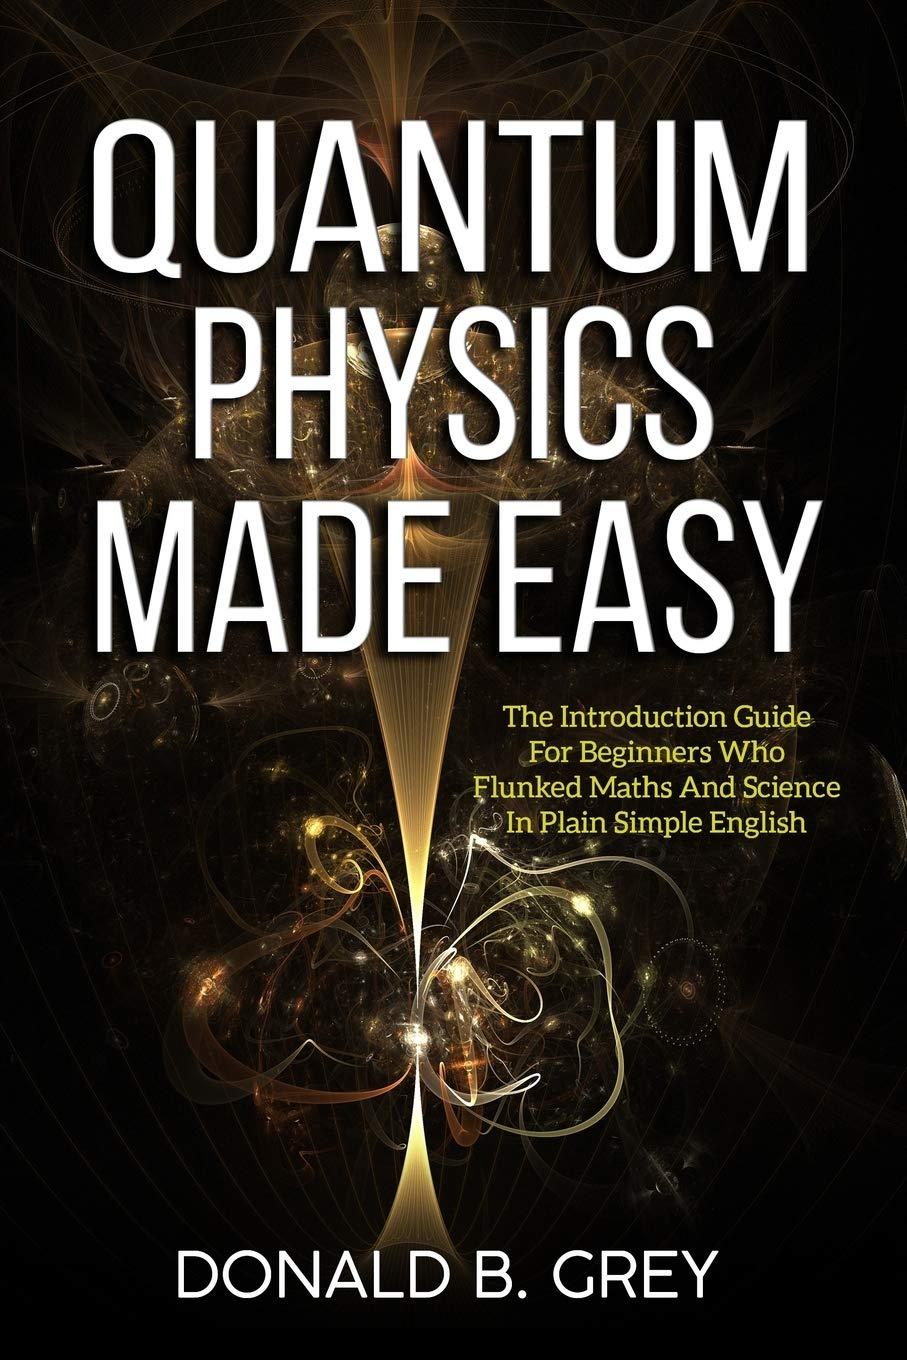 Quantum Physics Made Easy The Introduction Guide For Beginners Who Flunked Maths And Science In Plain Simple English